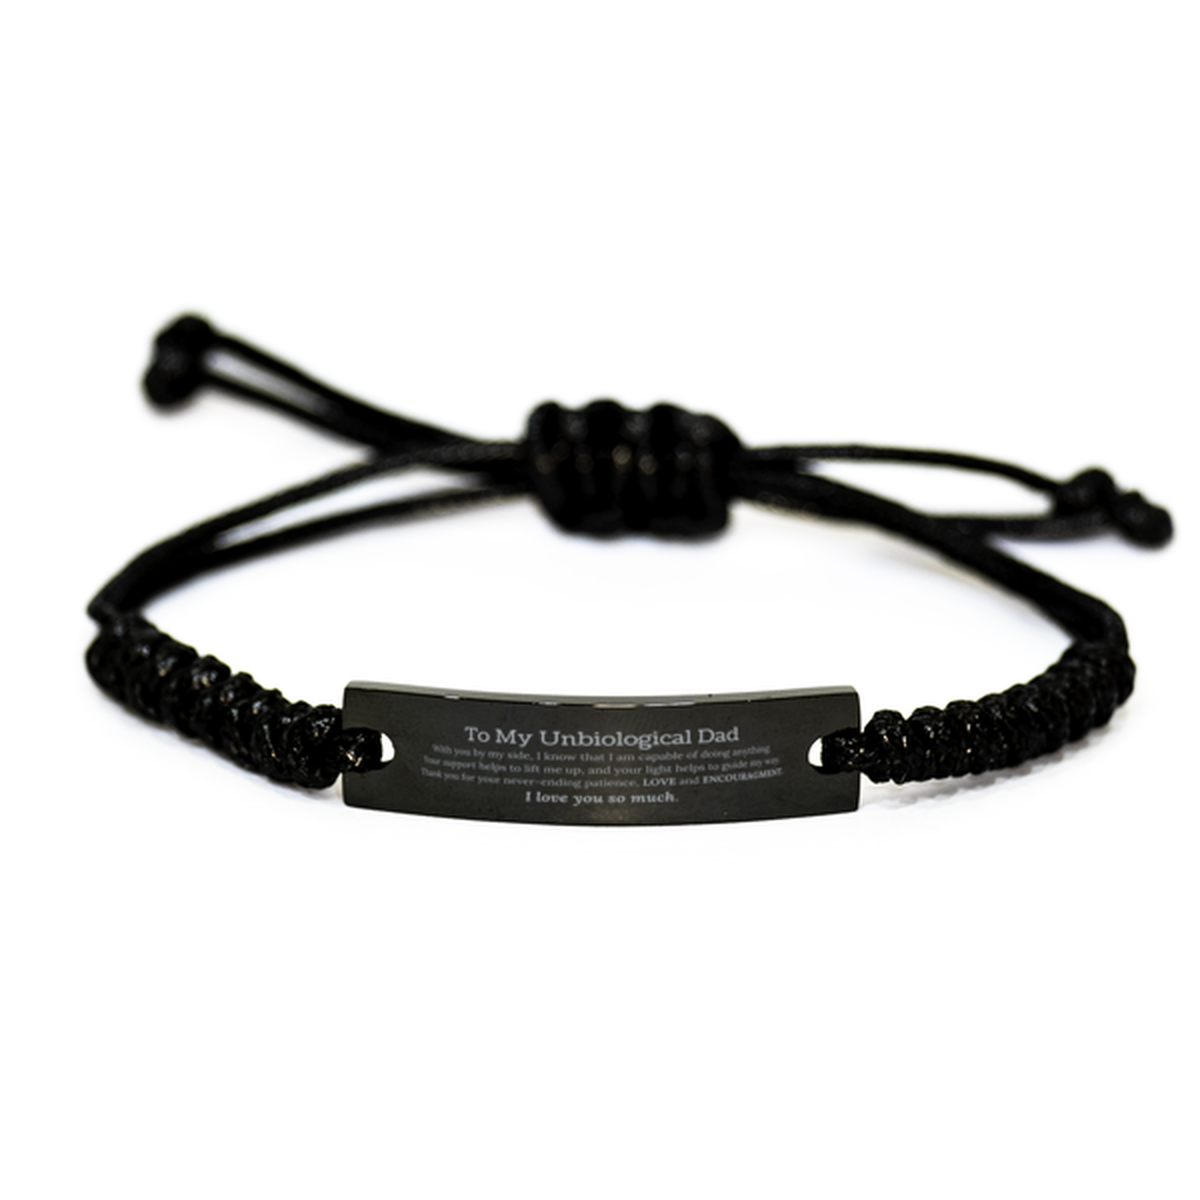 Appreciation Unbiological Dad Black Rope Bracelet Gifts, To My Unbiological Dad Birthday Christmas Wedding Keepsake Gifts for Unbiological Dad With you by my side, I know that I am capable of doing anything. I love you so much